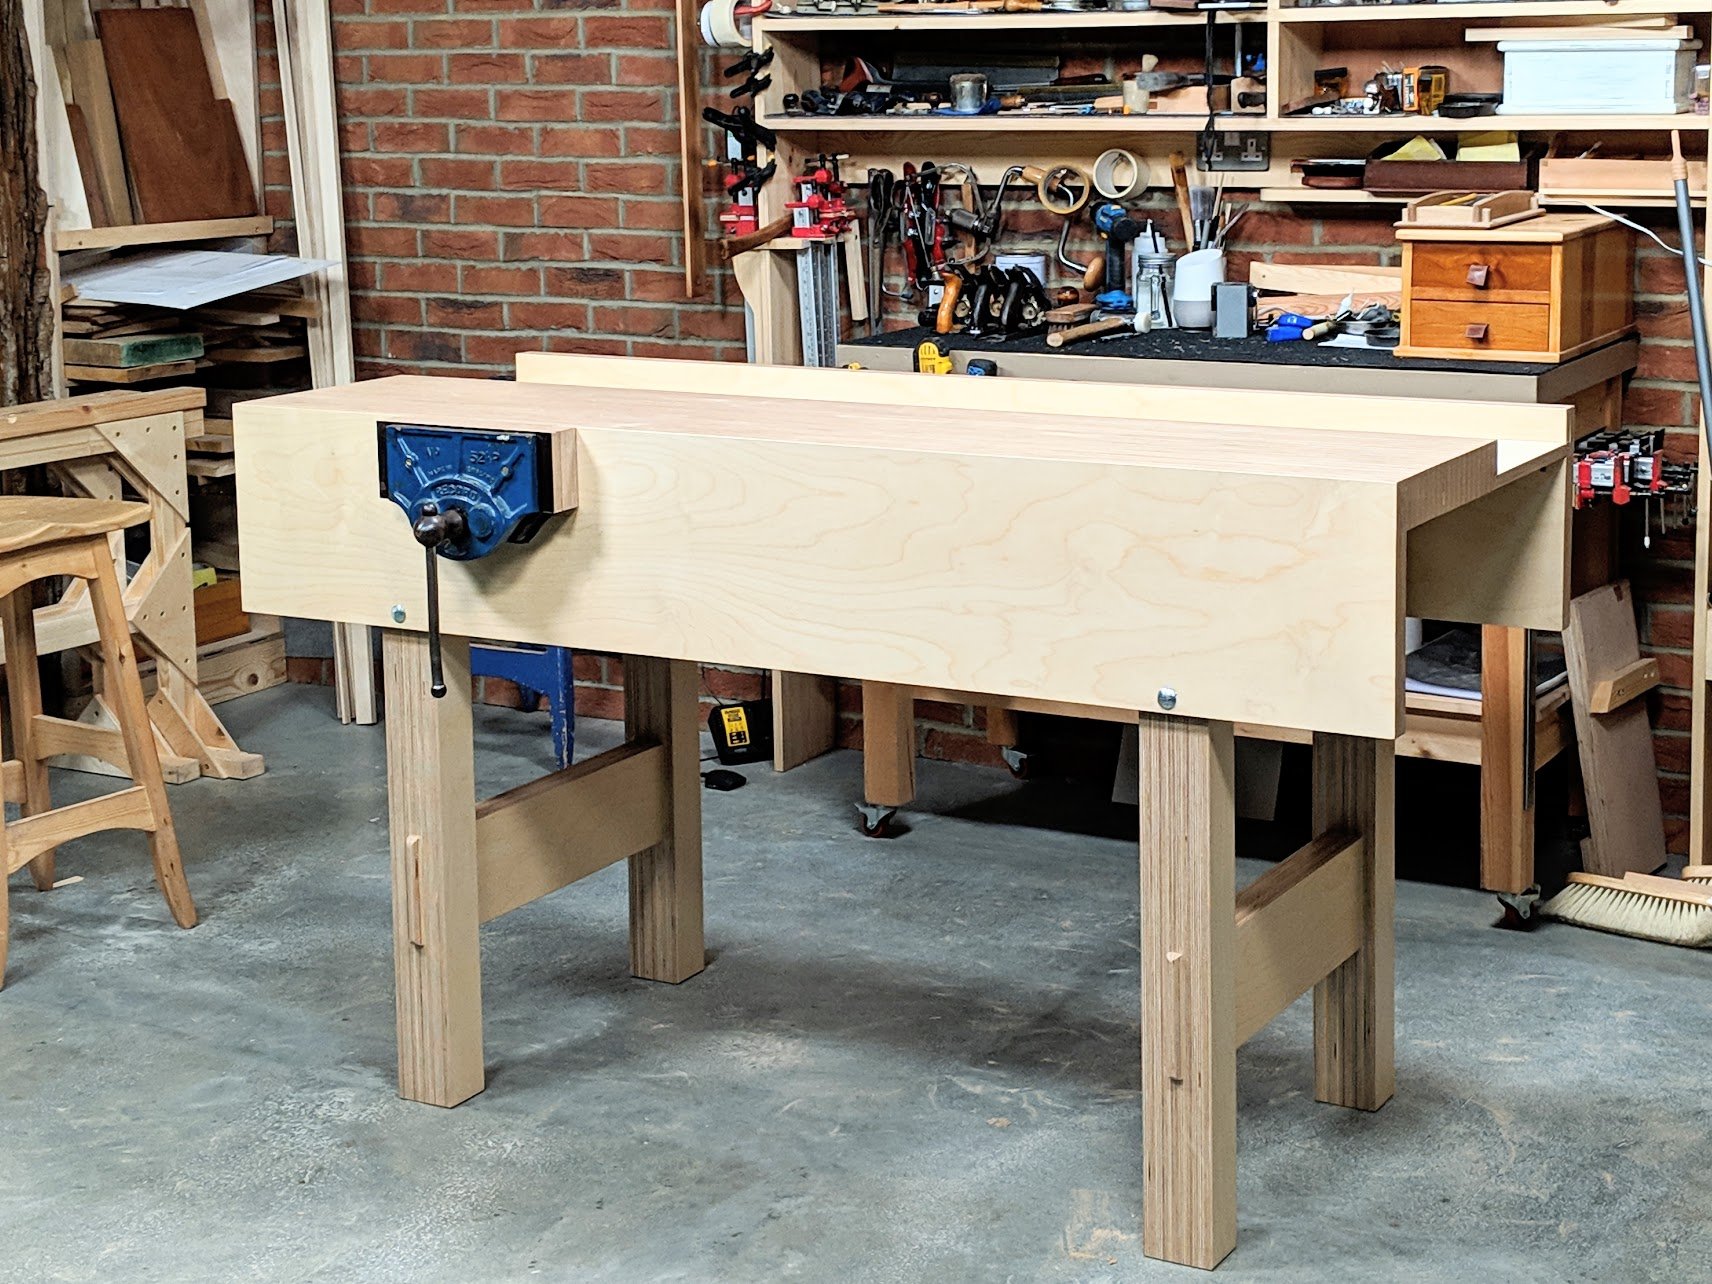 what kind of plywood do you use for a workbench?